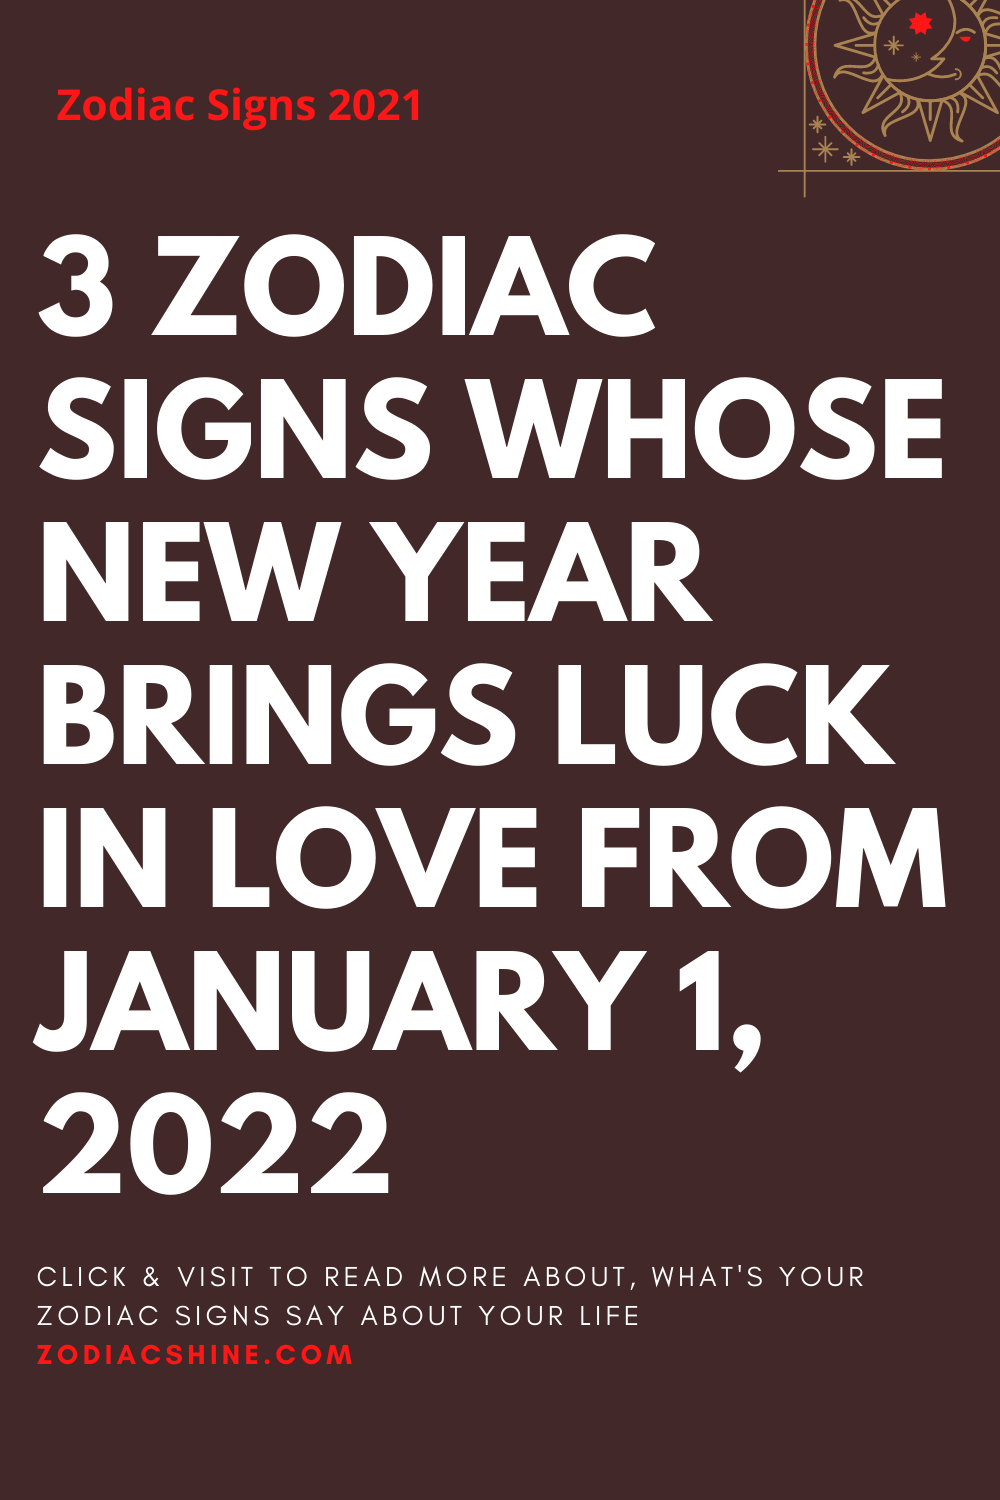 3 ZODIAC SIGNS WHOSE NEW YEAR BRINGS LUCK IN LOVE FROM JANUARY 1, 2022